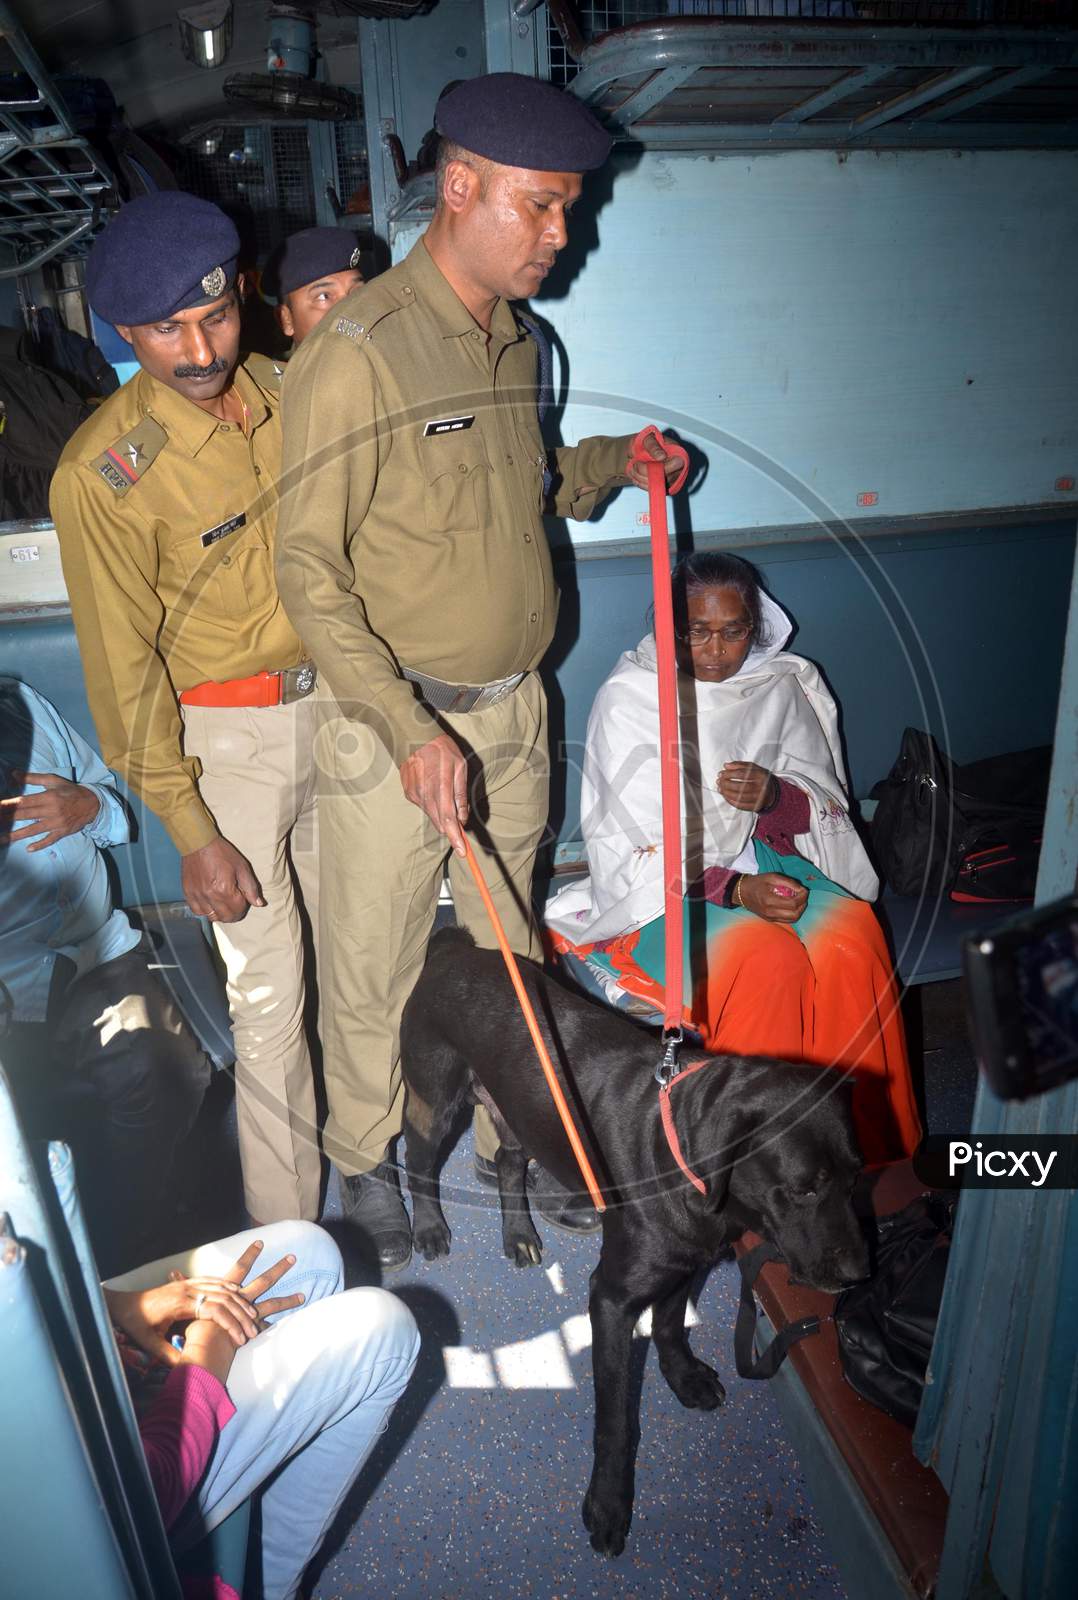 Railway Police Force (RPF) personnel inspect the tracks along with a sniffer dog,